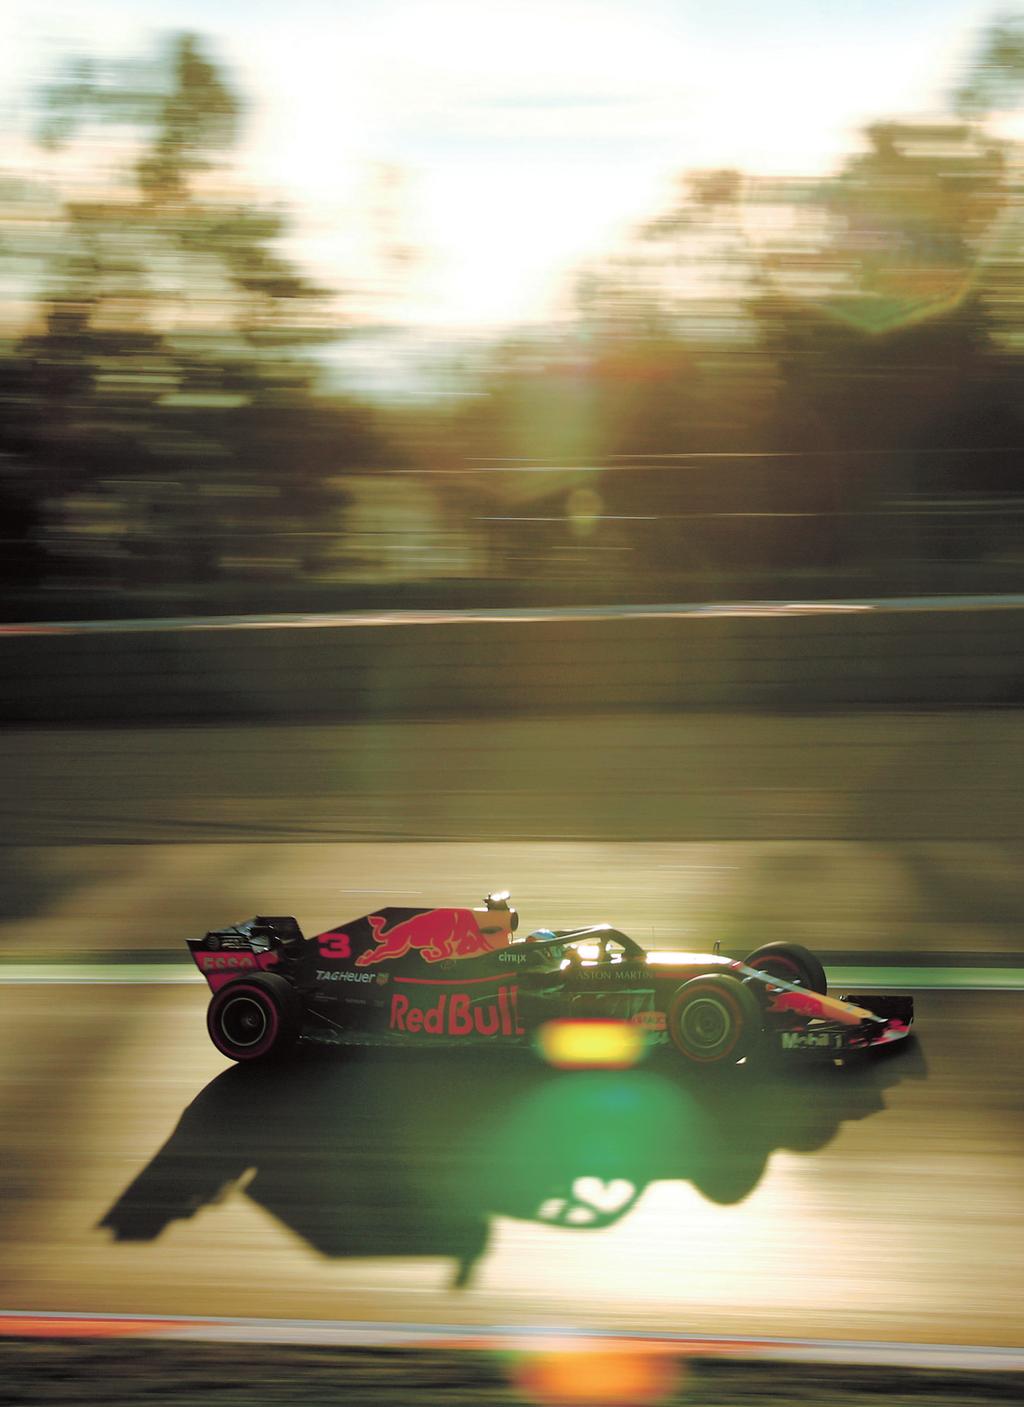 All Photographs courtesy Red Bull Racing